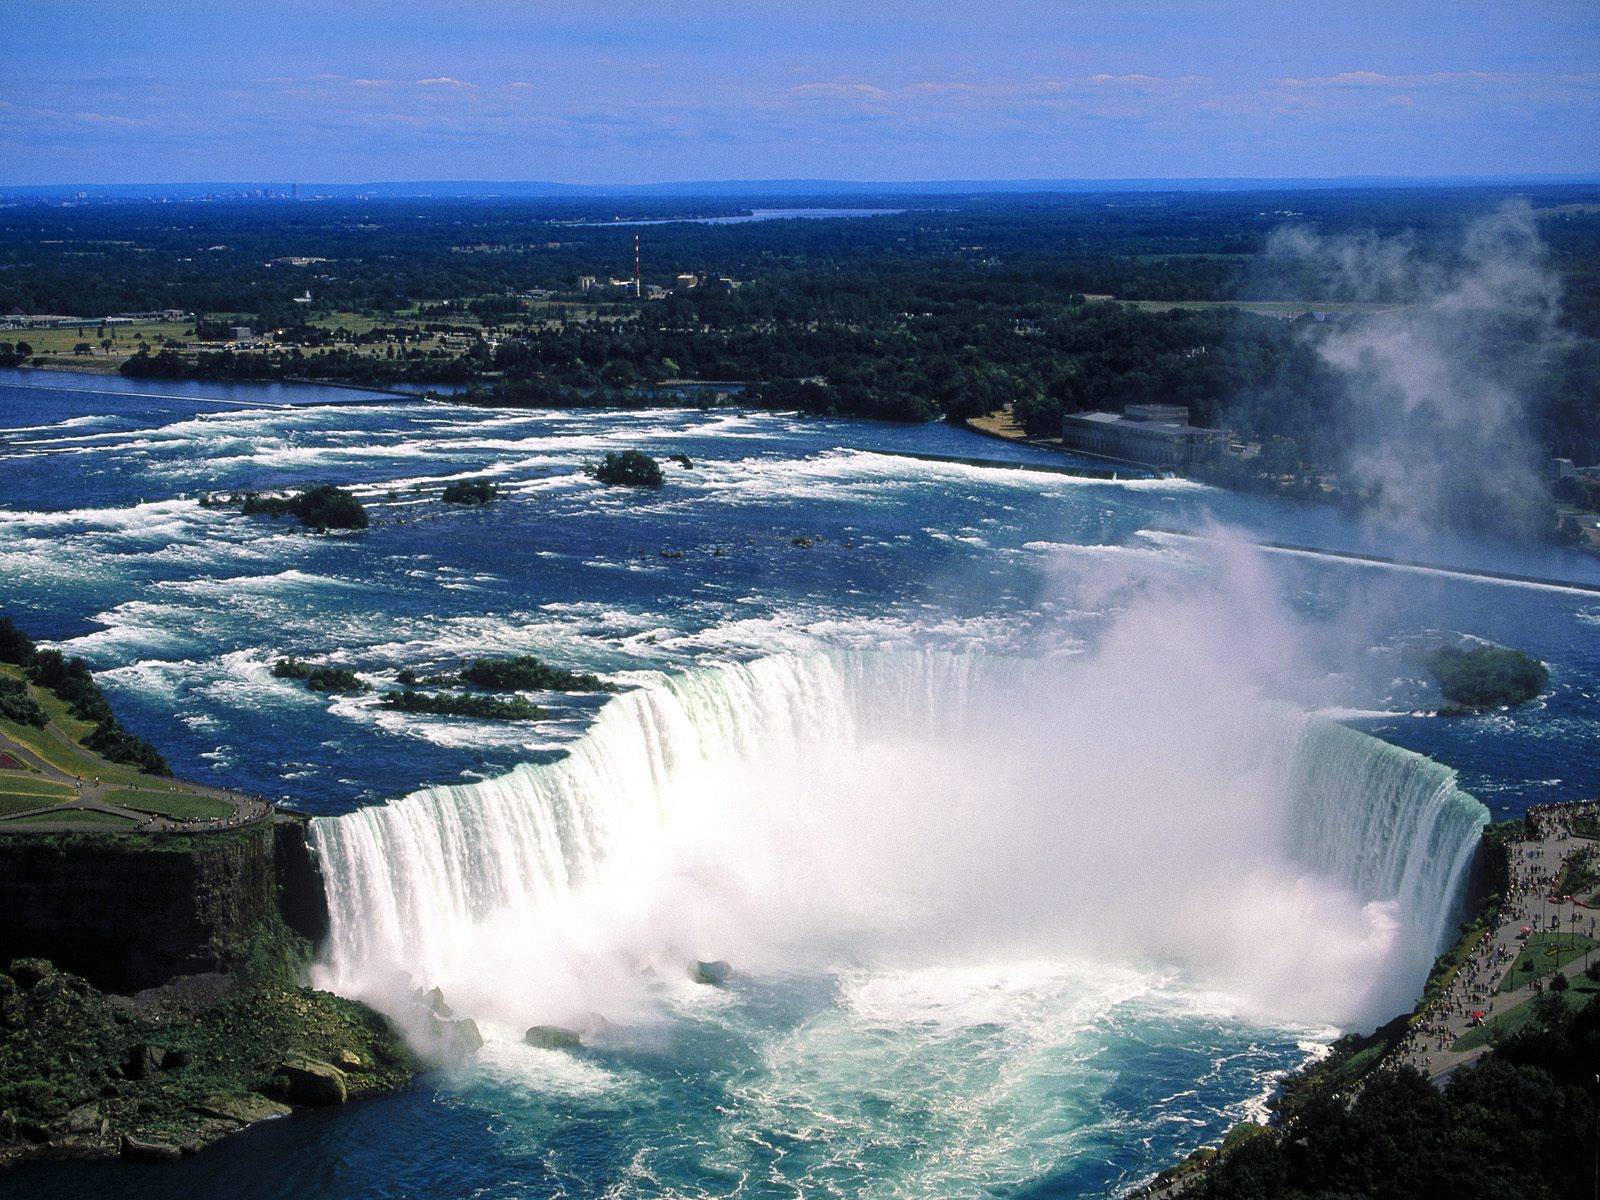 The Niagara Falls in Pictures